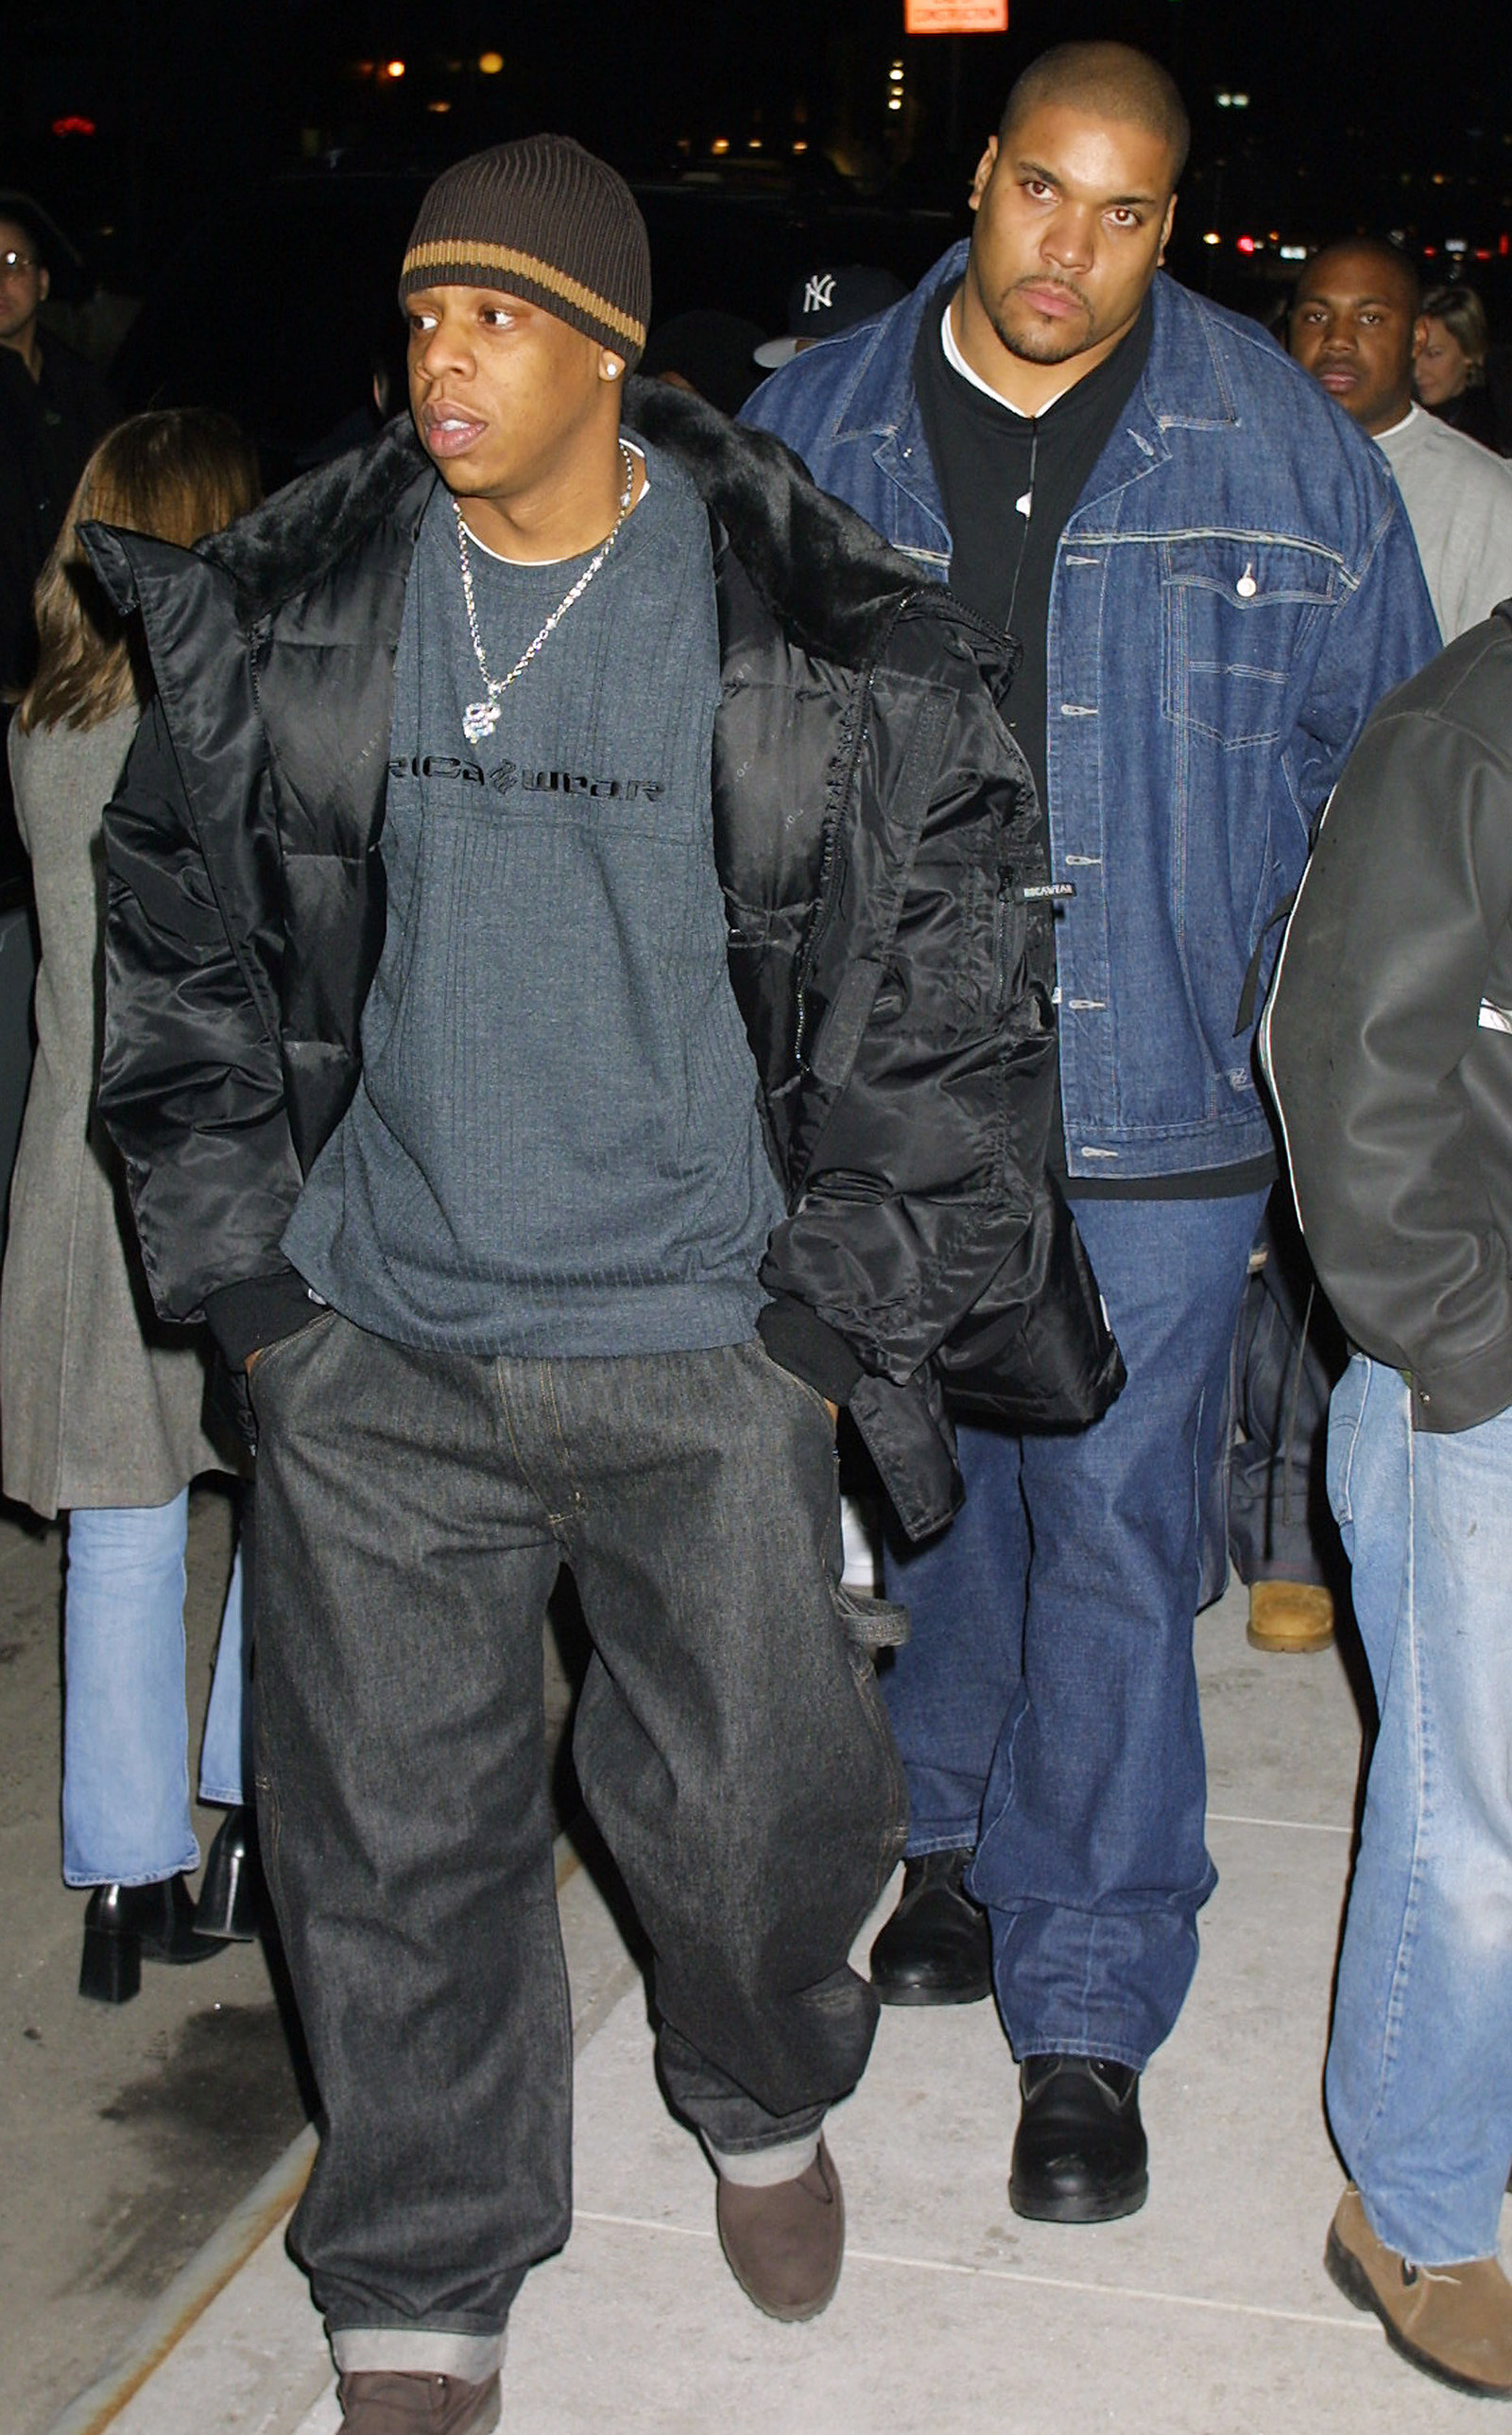 27 Jay Z In The Early '00s That He'd Never Do Now